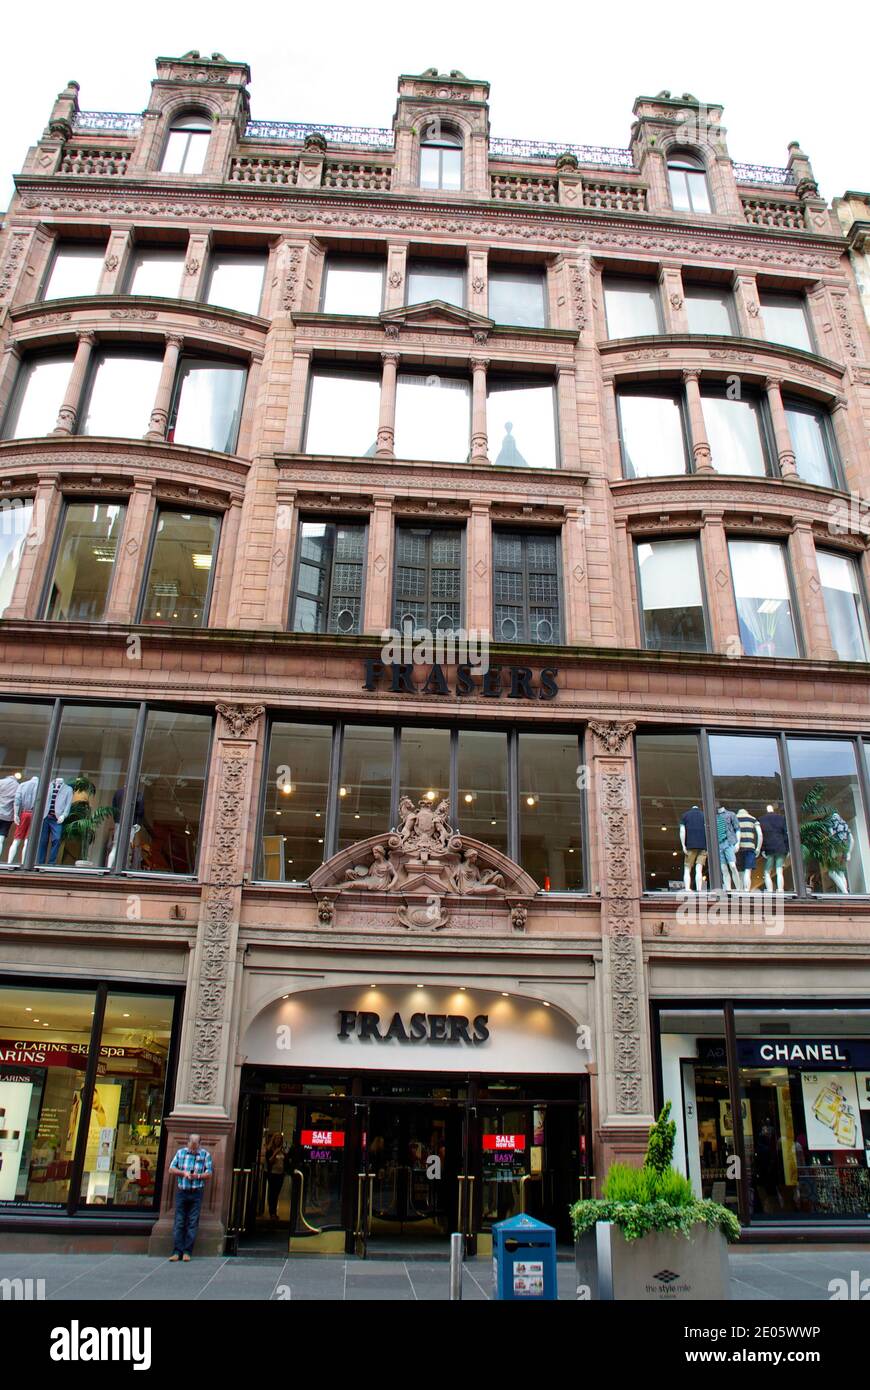 Frasers department store Glasgow Stock Photo